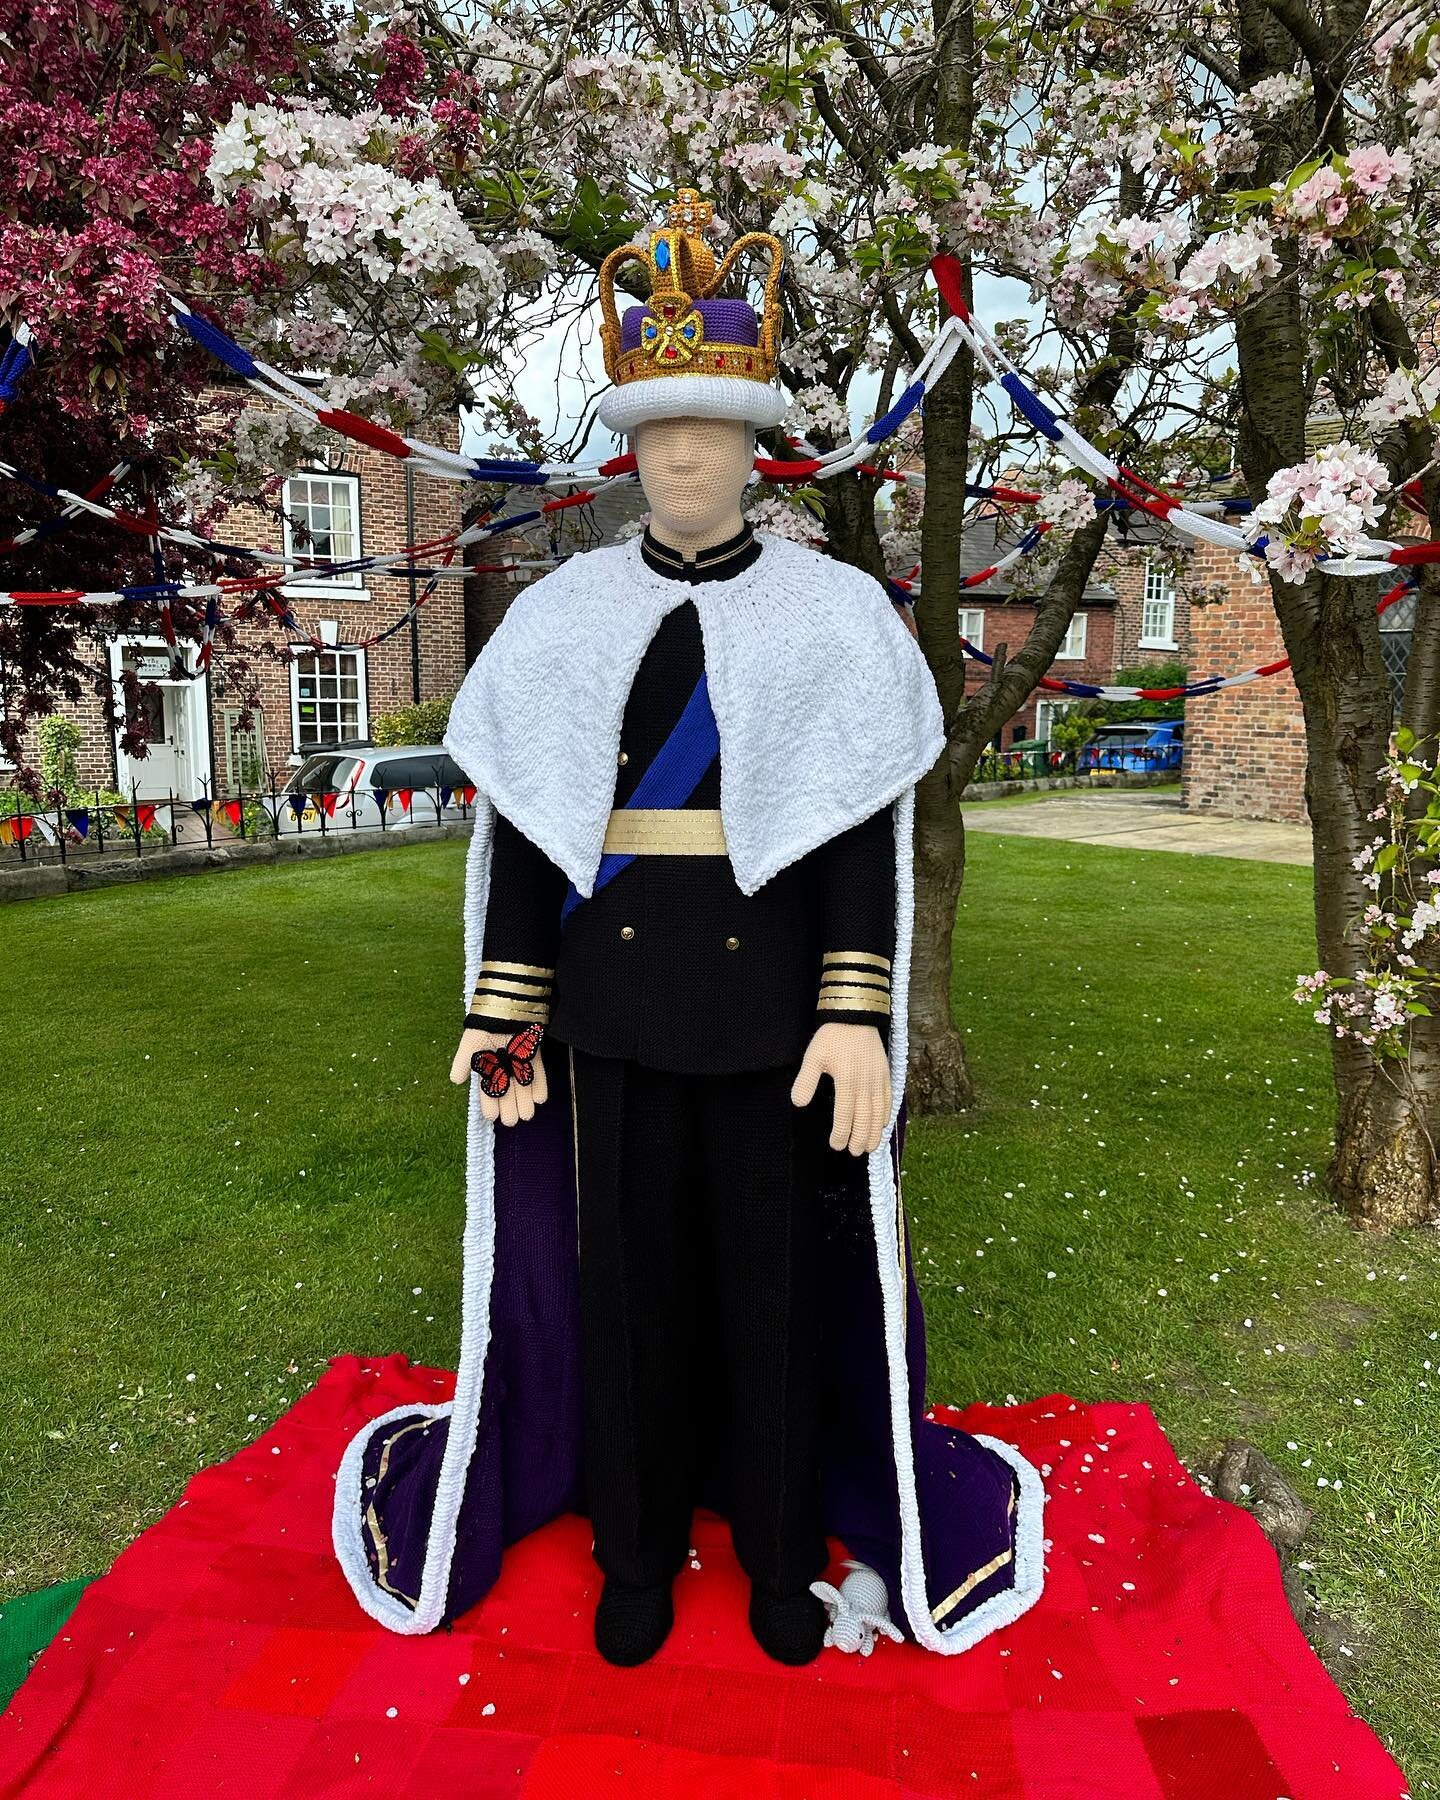 The yarn bombers of Holmes Chapel have outdone themselves for the coronation of King Charles III and Queen Camilla. So impressive and I love all the nods to nature 🦋